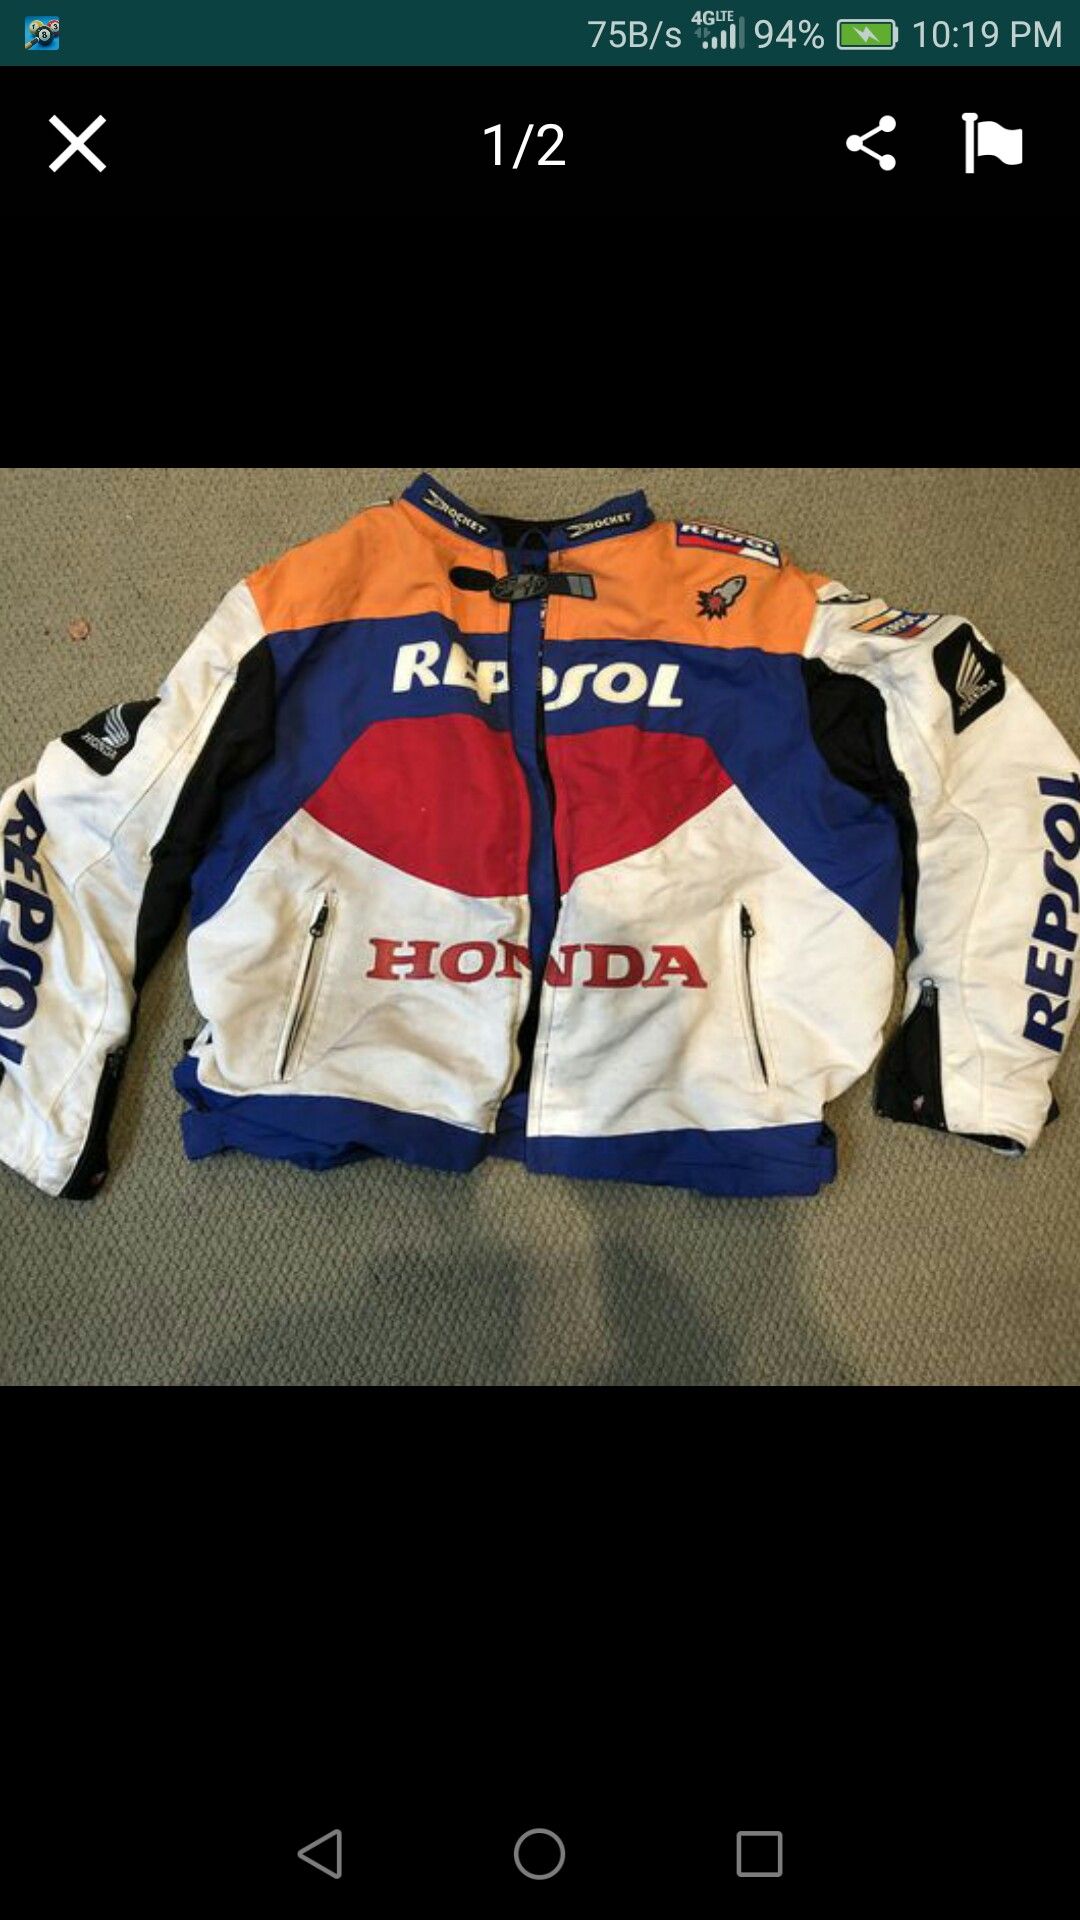 Someone steal my two motorcycle jackets Repsol and Suzuki